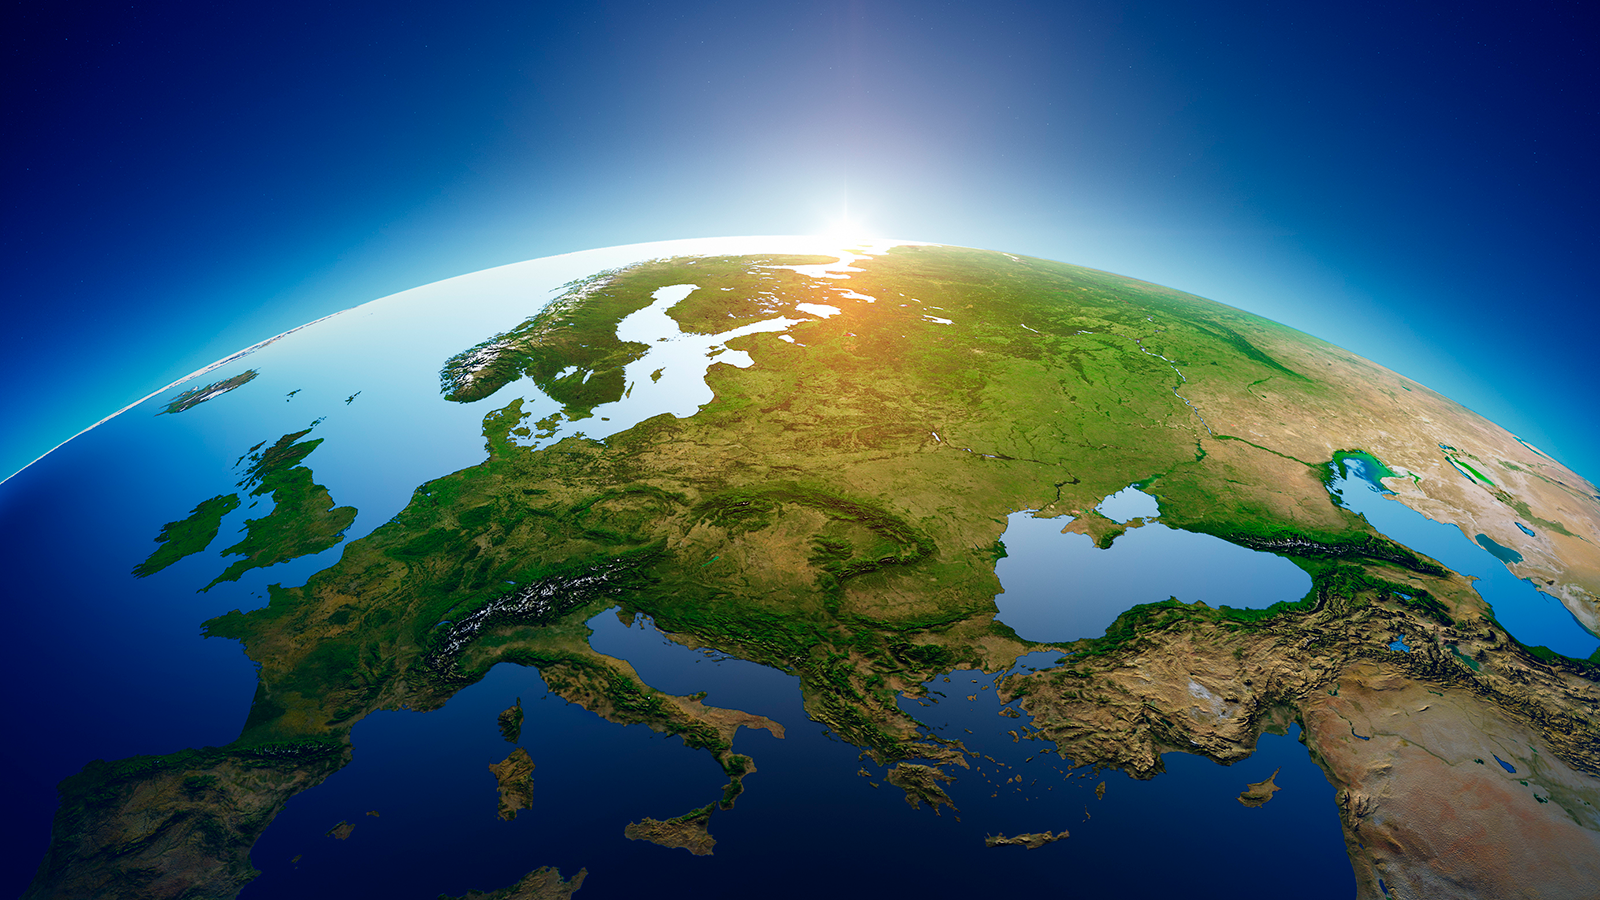 The EU’s initiative to create a highly accurate digital twin of Earth goes live